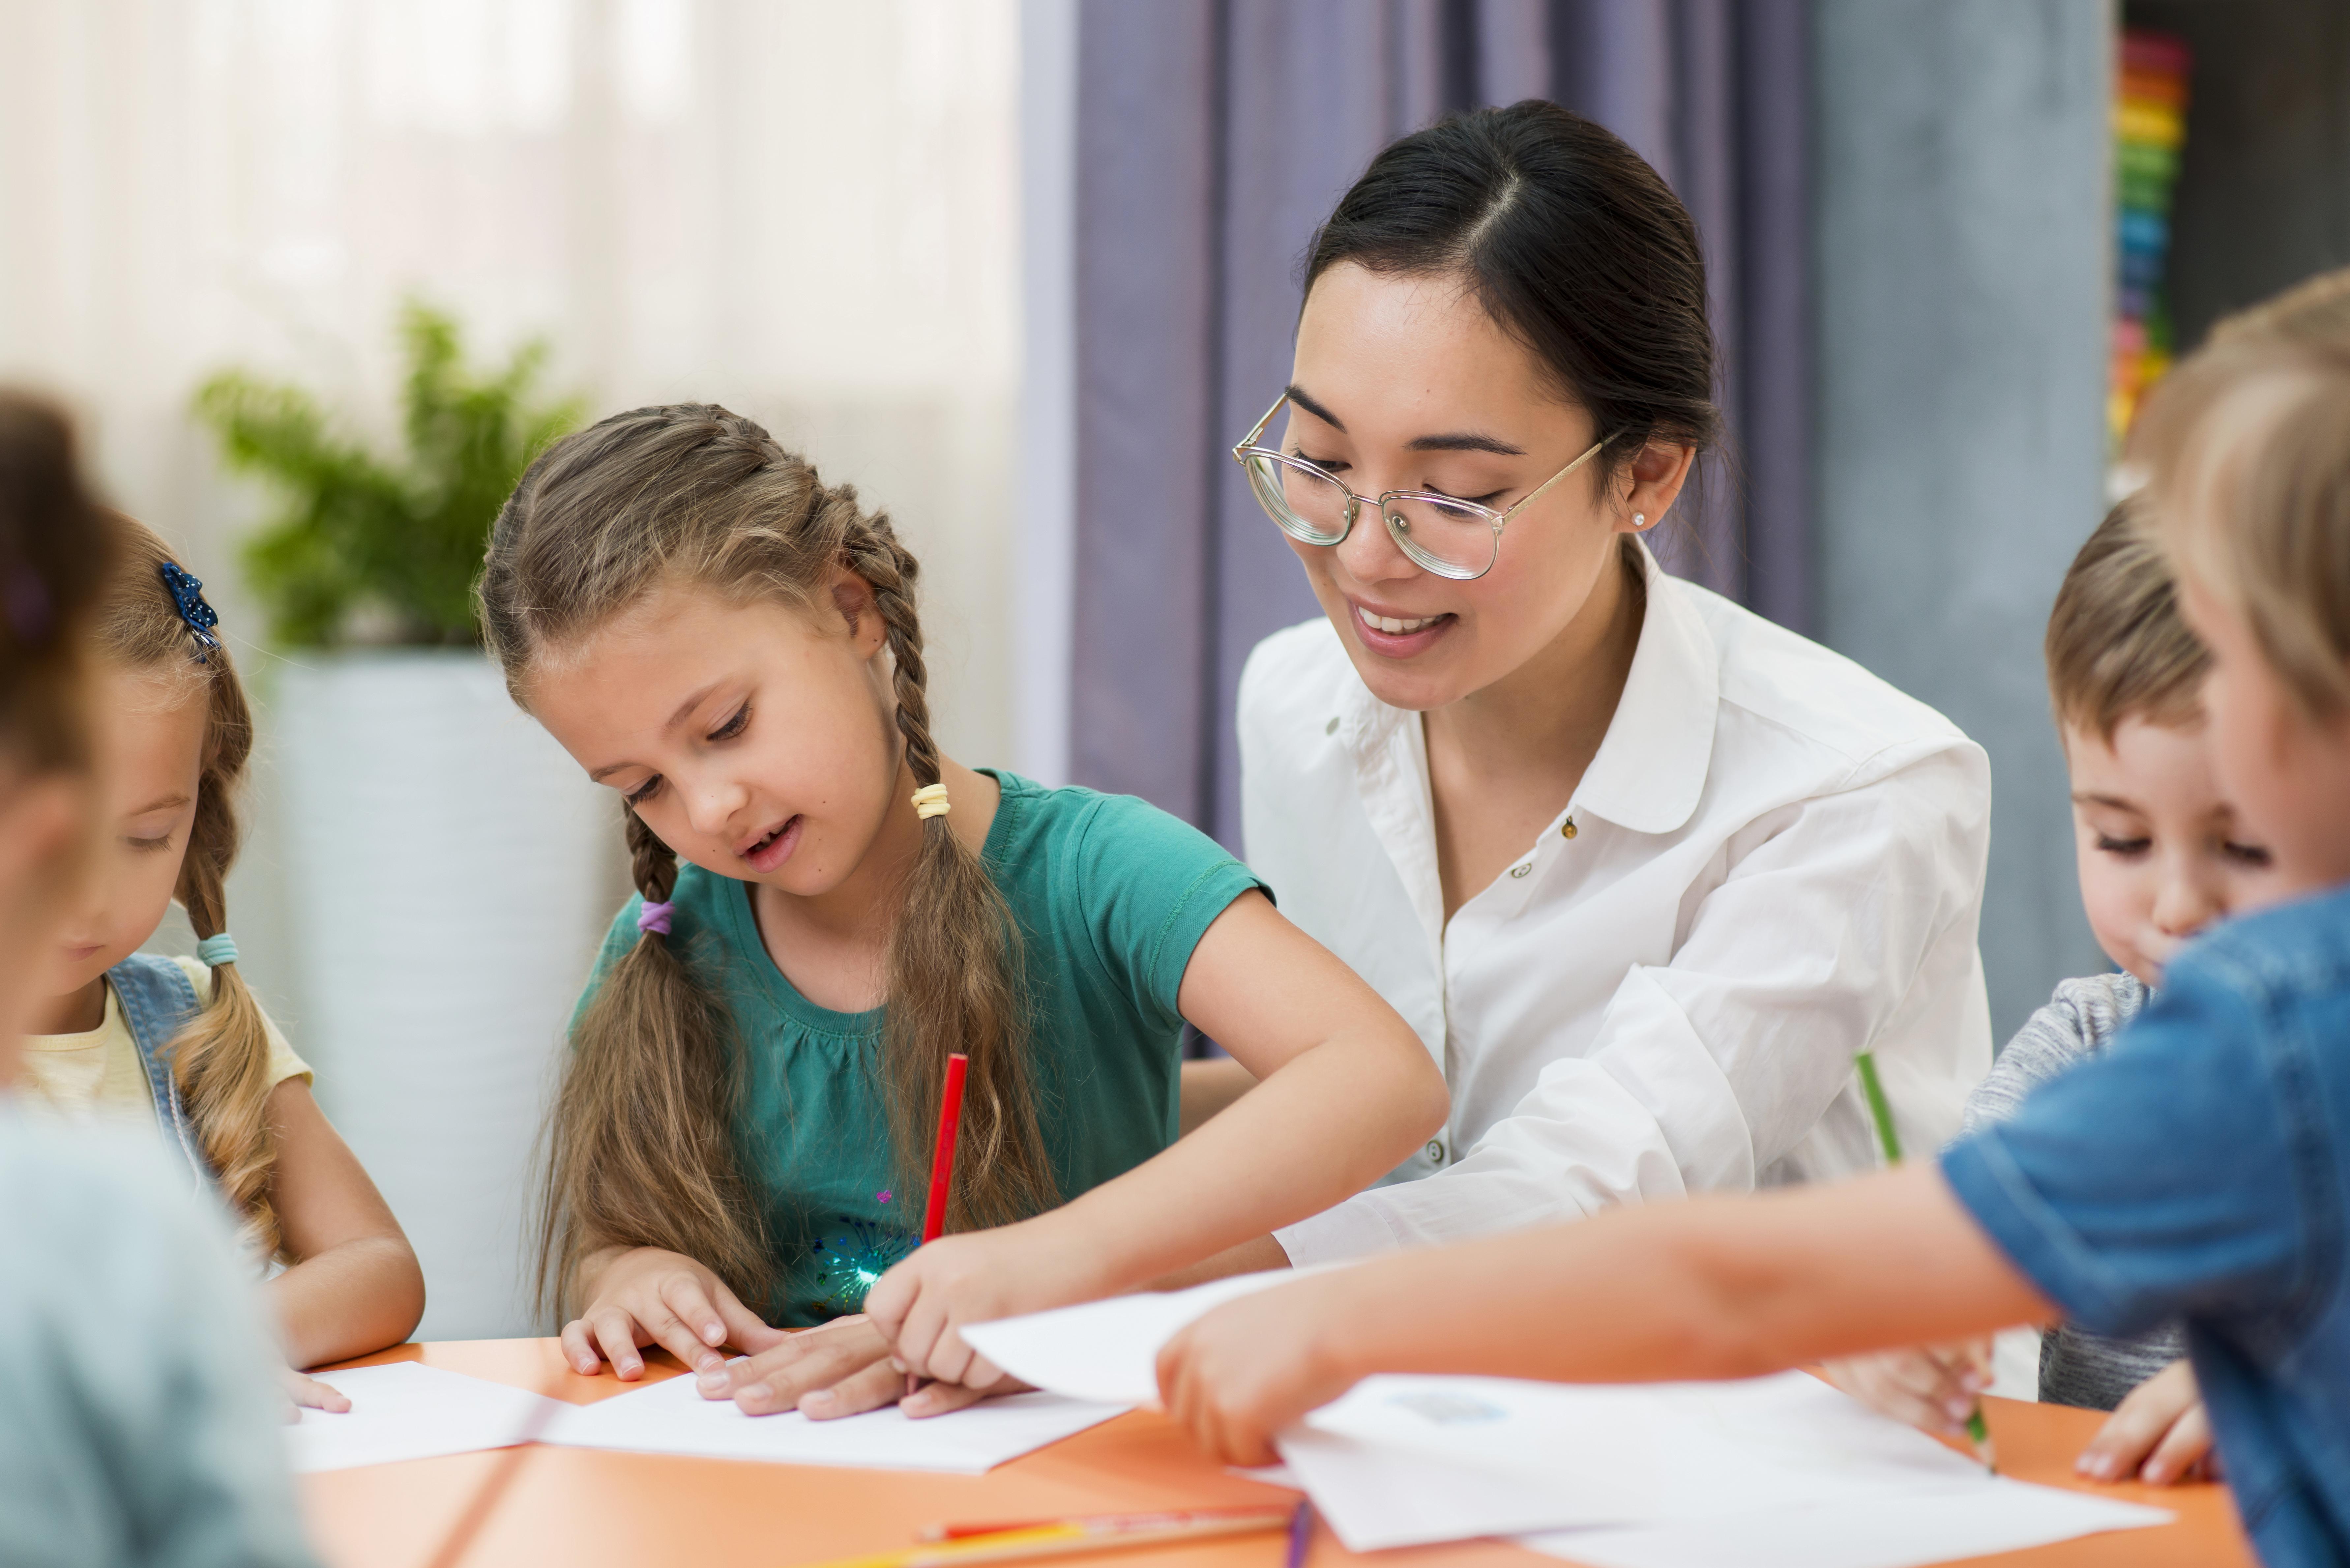 Communication strategies that work well with children